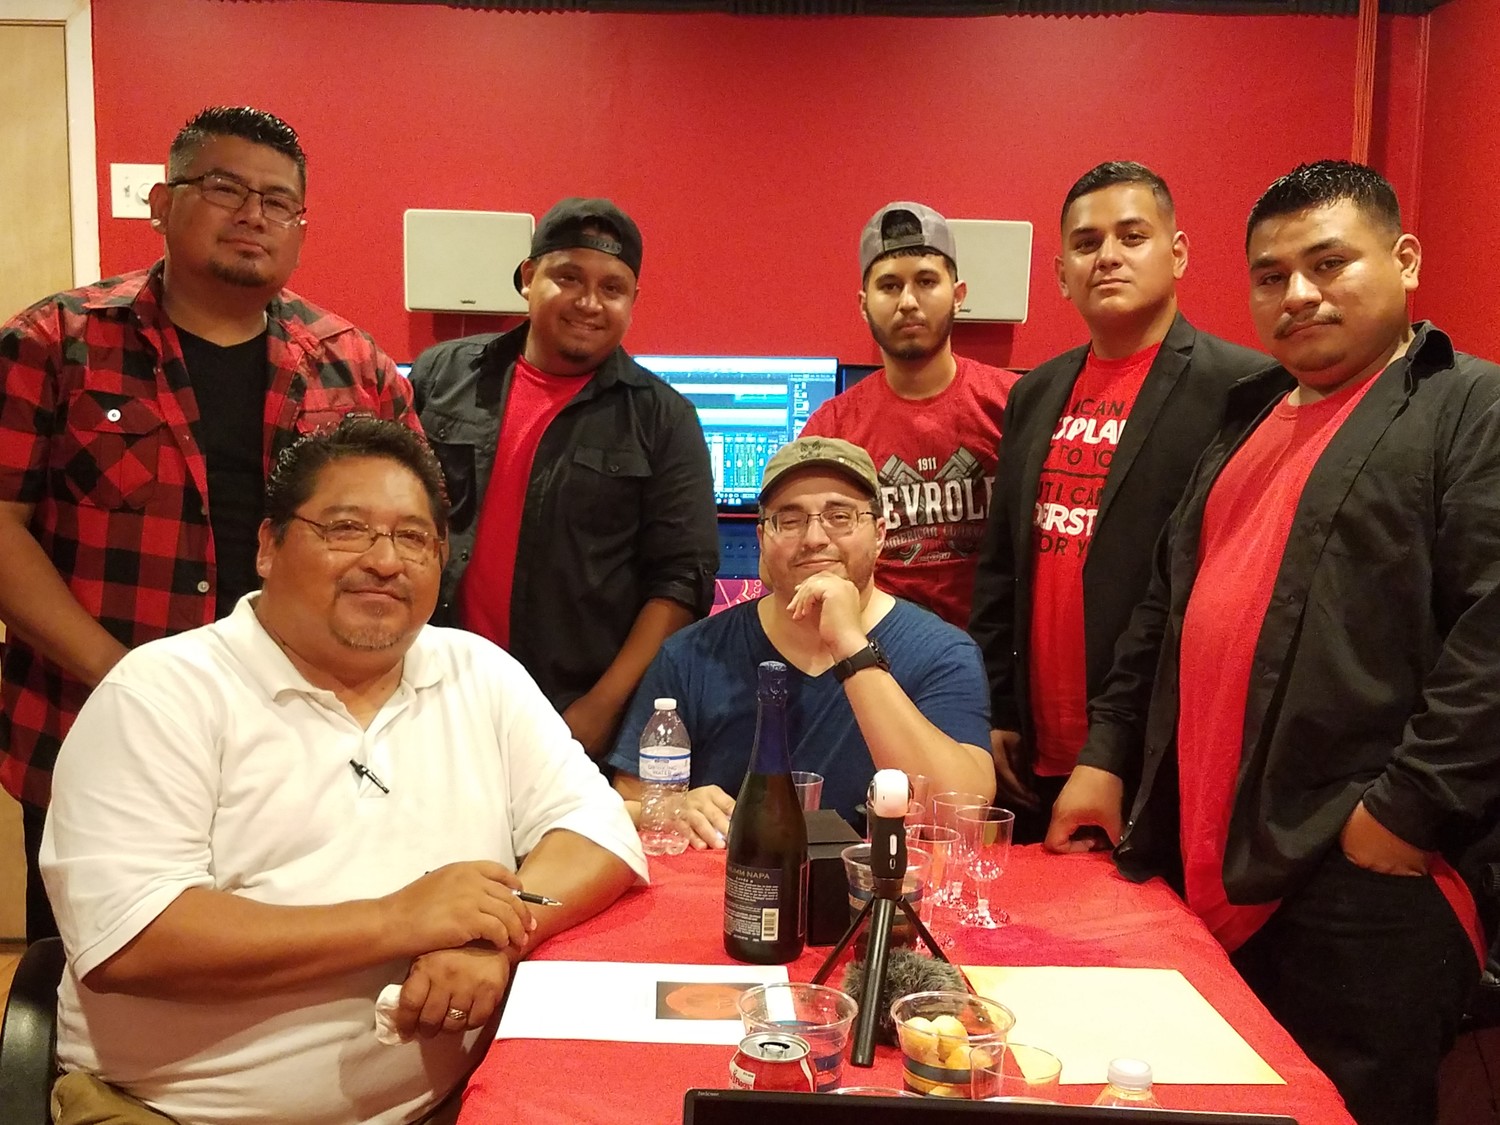 After opening for business, Red Room Recordz immediately announced their first band signed, Grupo Creacion.